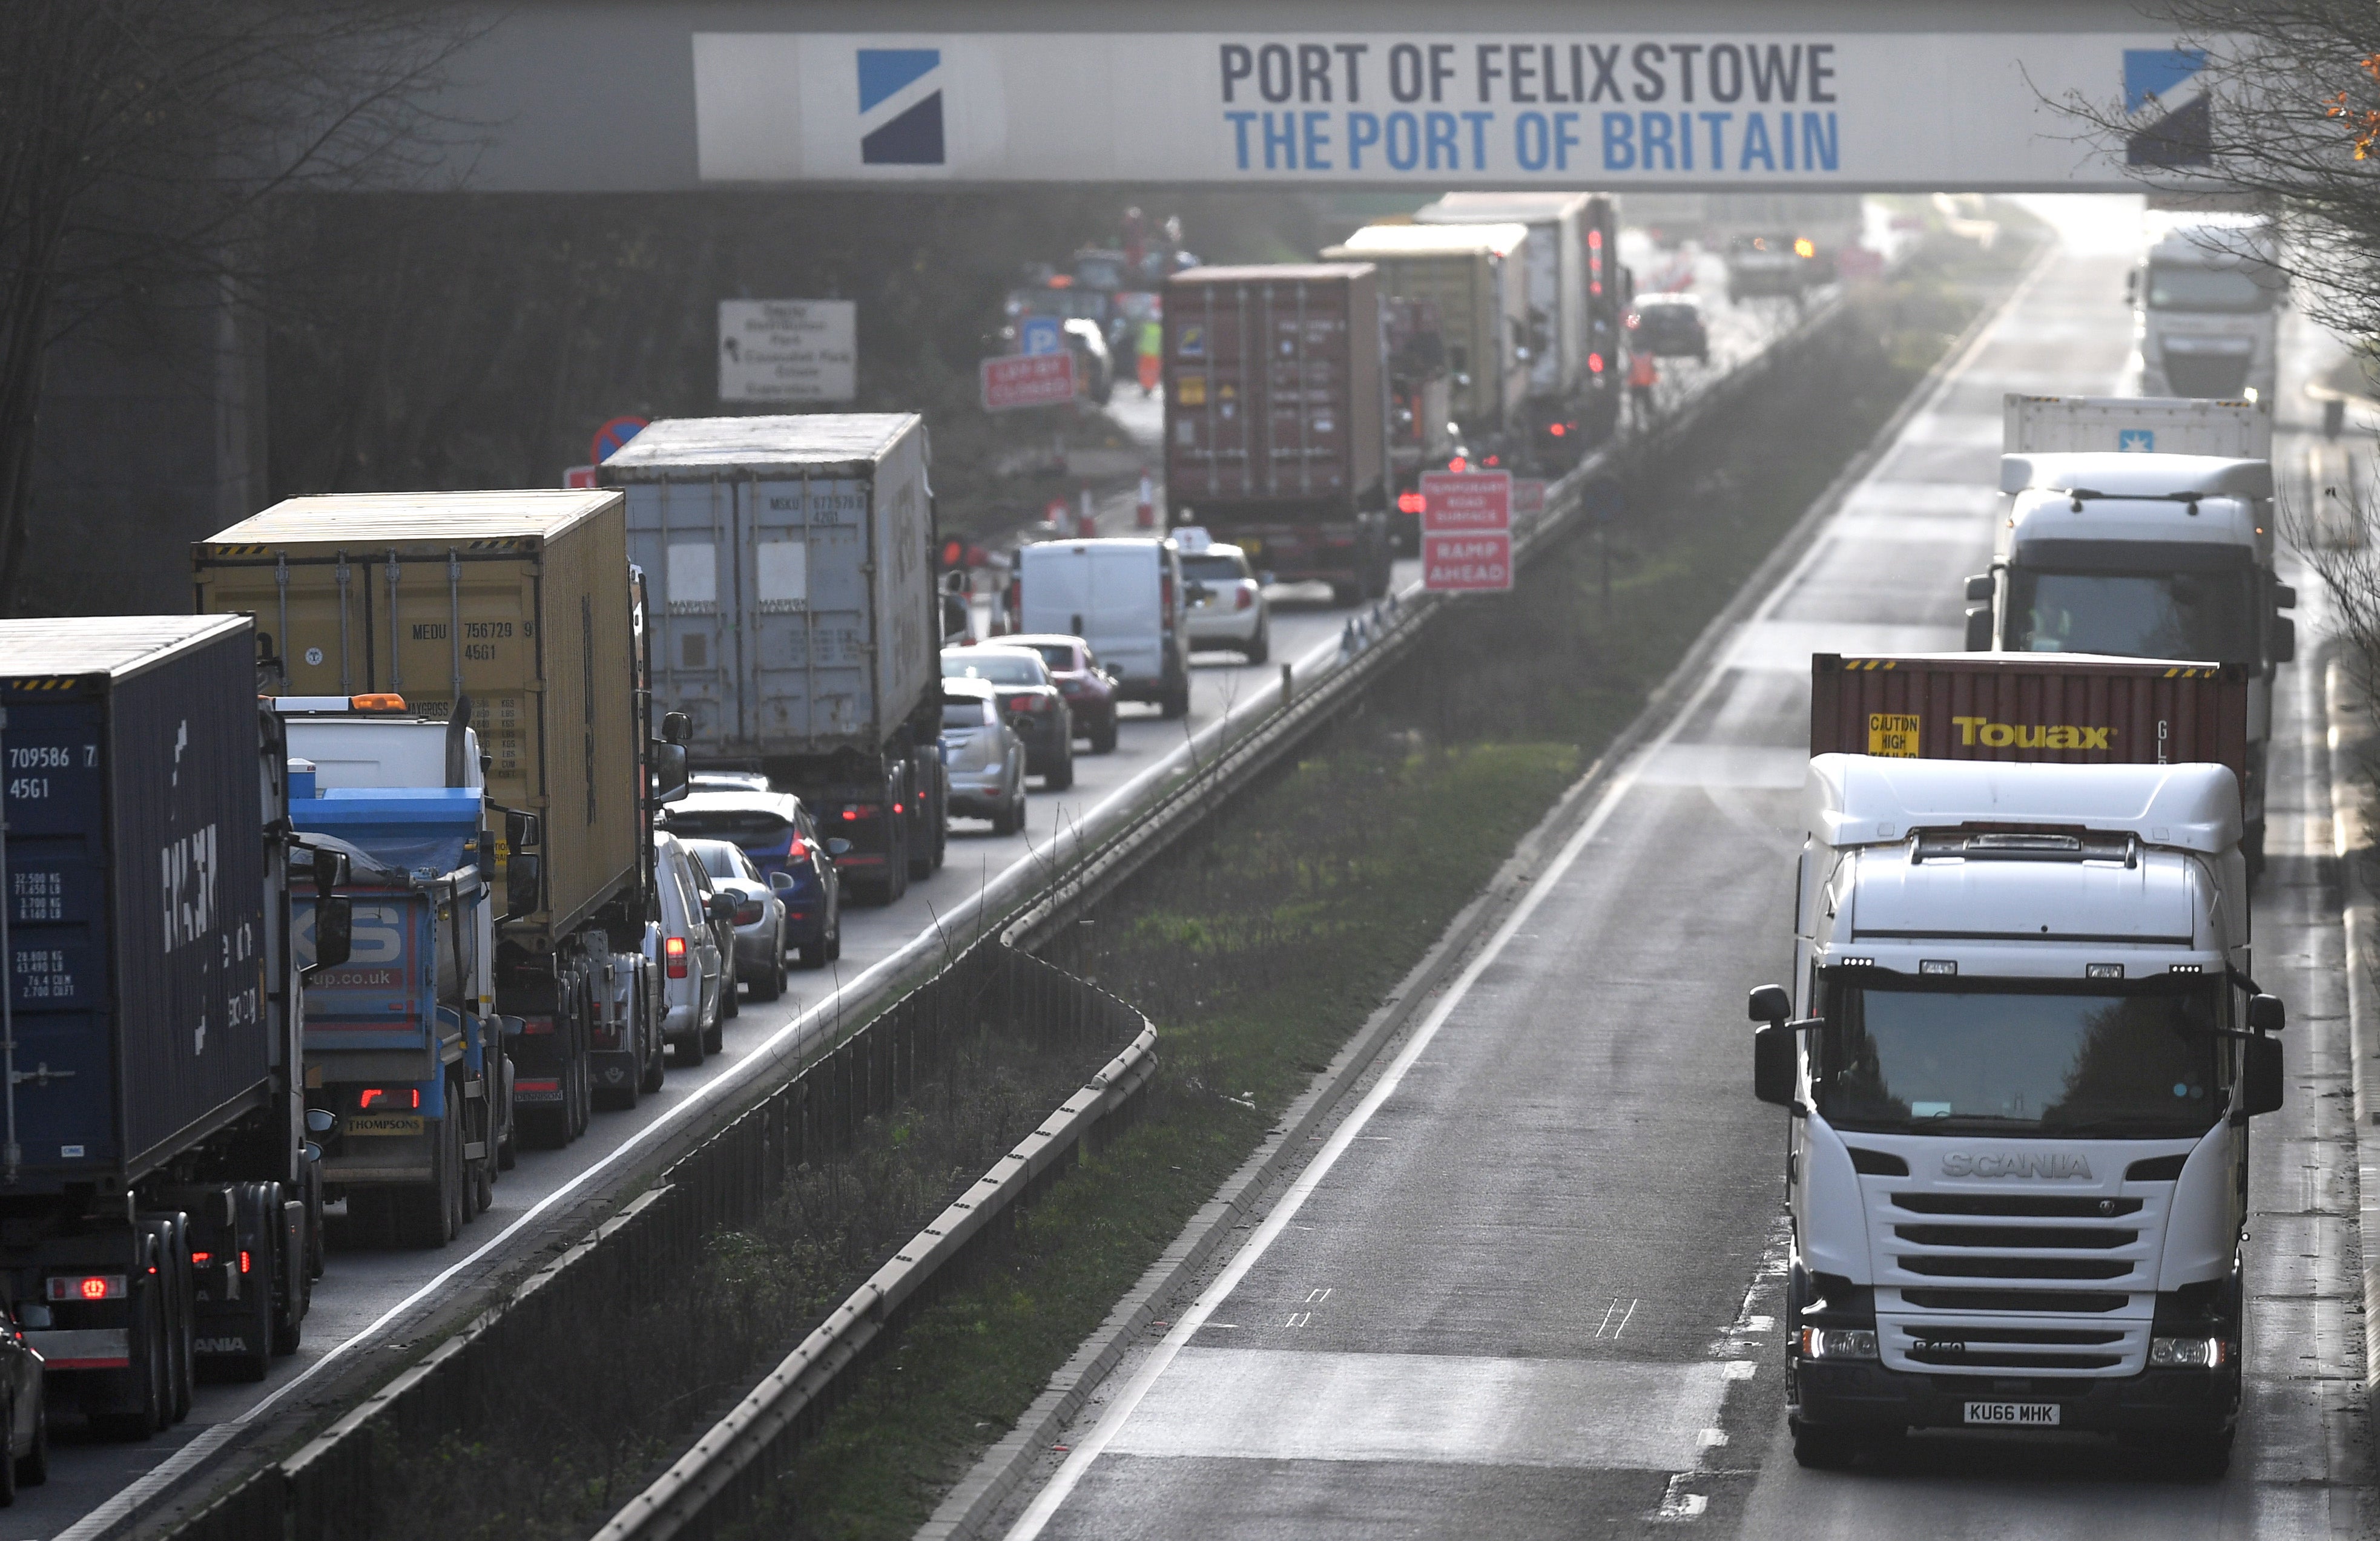 Lorries drive in and out of Port of Felixstowe